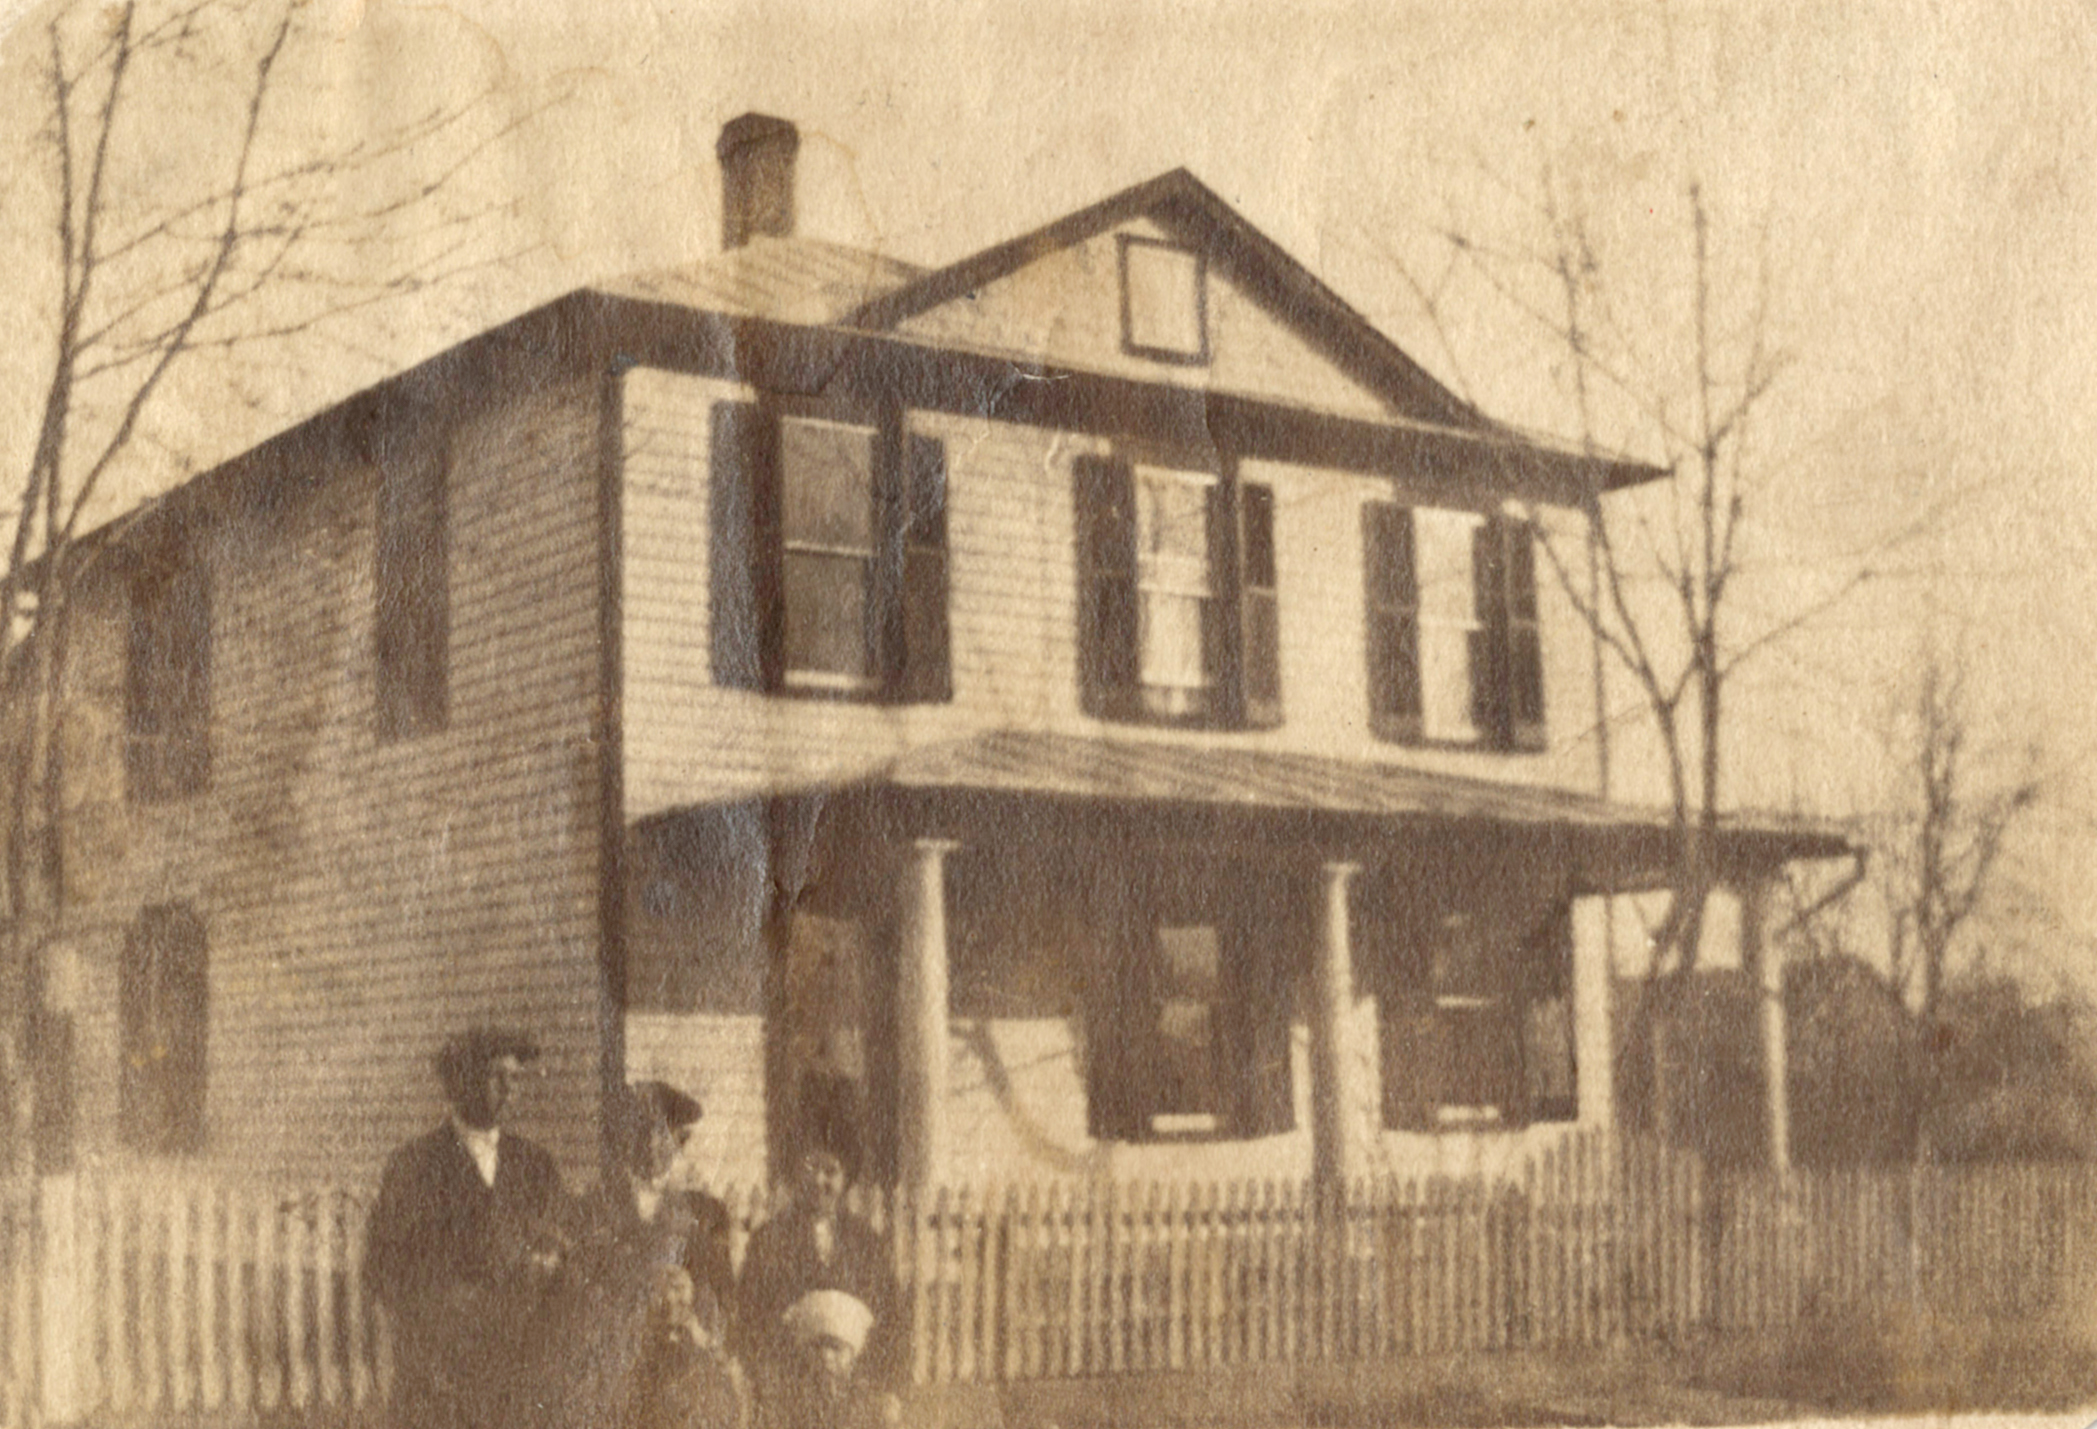 This Harrisonburg VA home was purchased from John Shank (Aaron's father) by Ira Showalter (Marjorie's father) when Aaron and Marjorie were both quite young